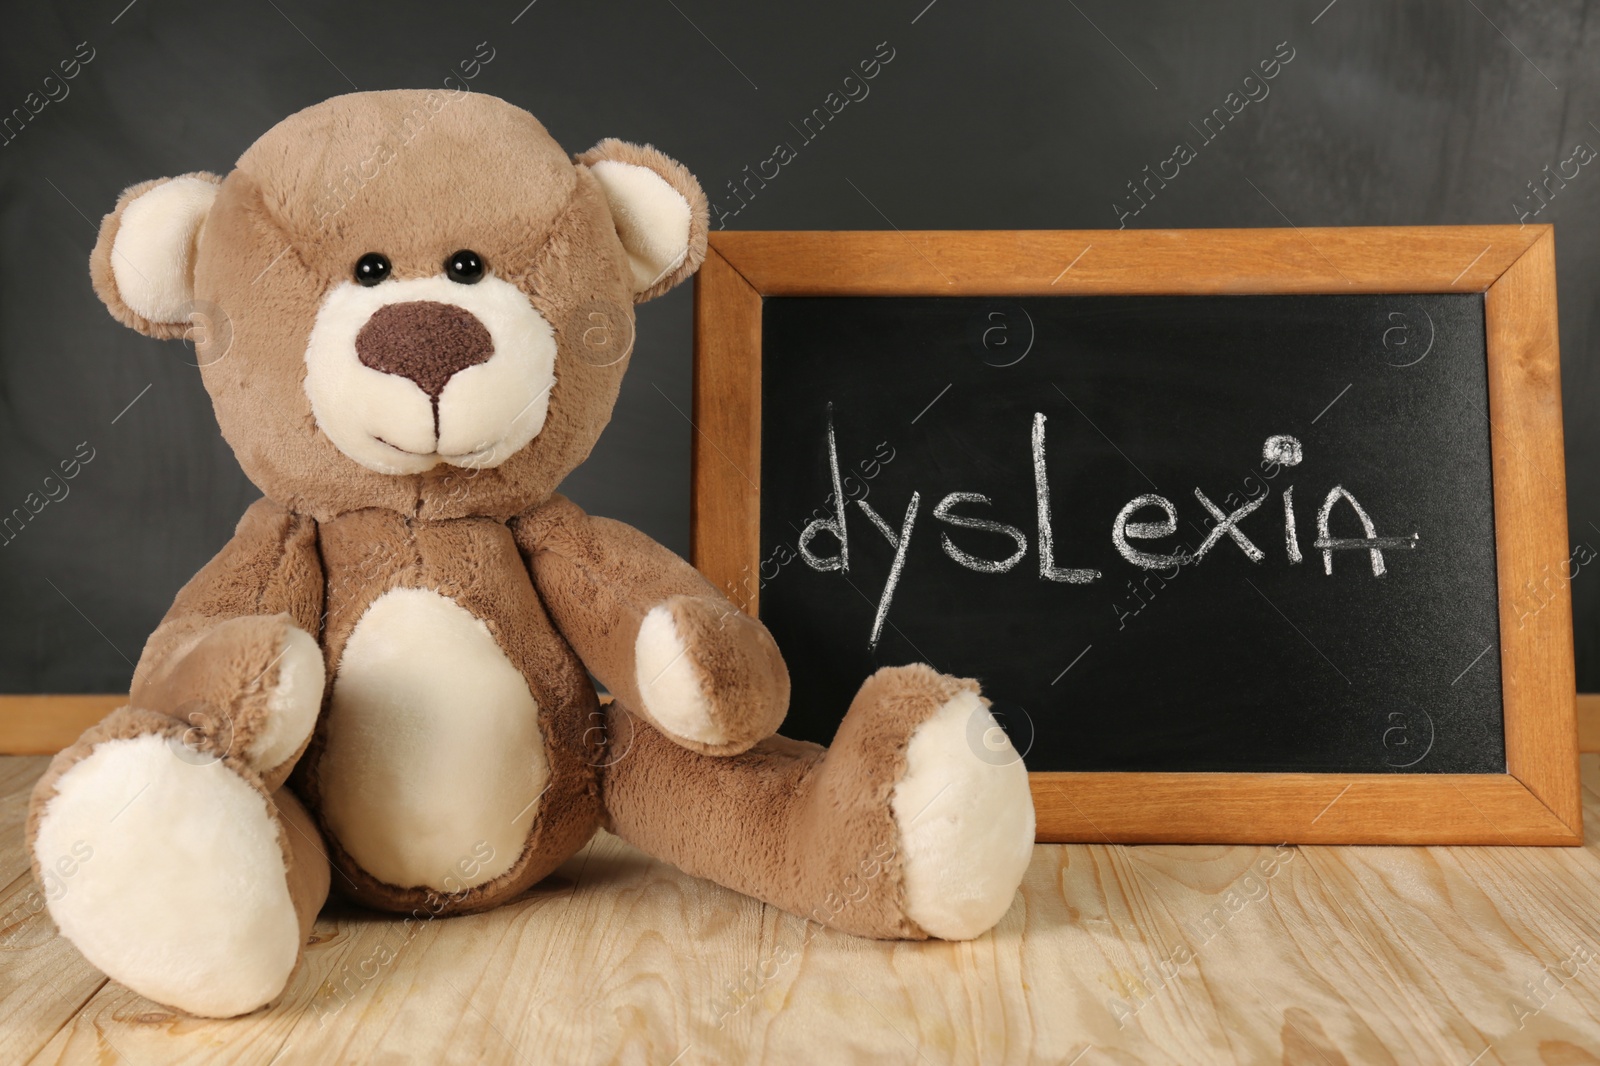 Photo of Teddy bear and small blackboard with word Dyslexia on wooden table